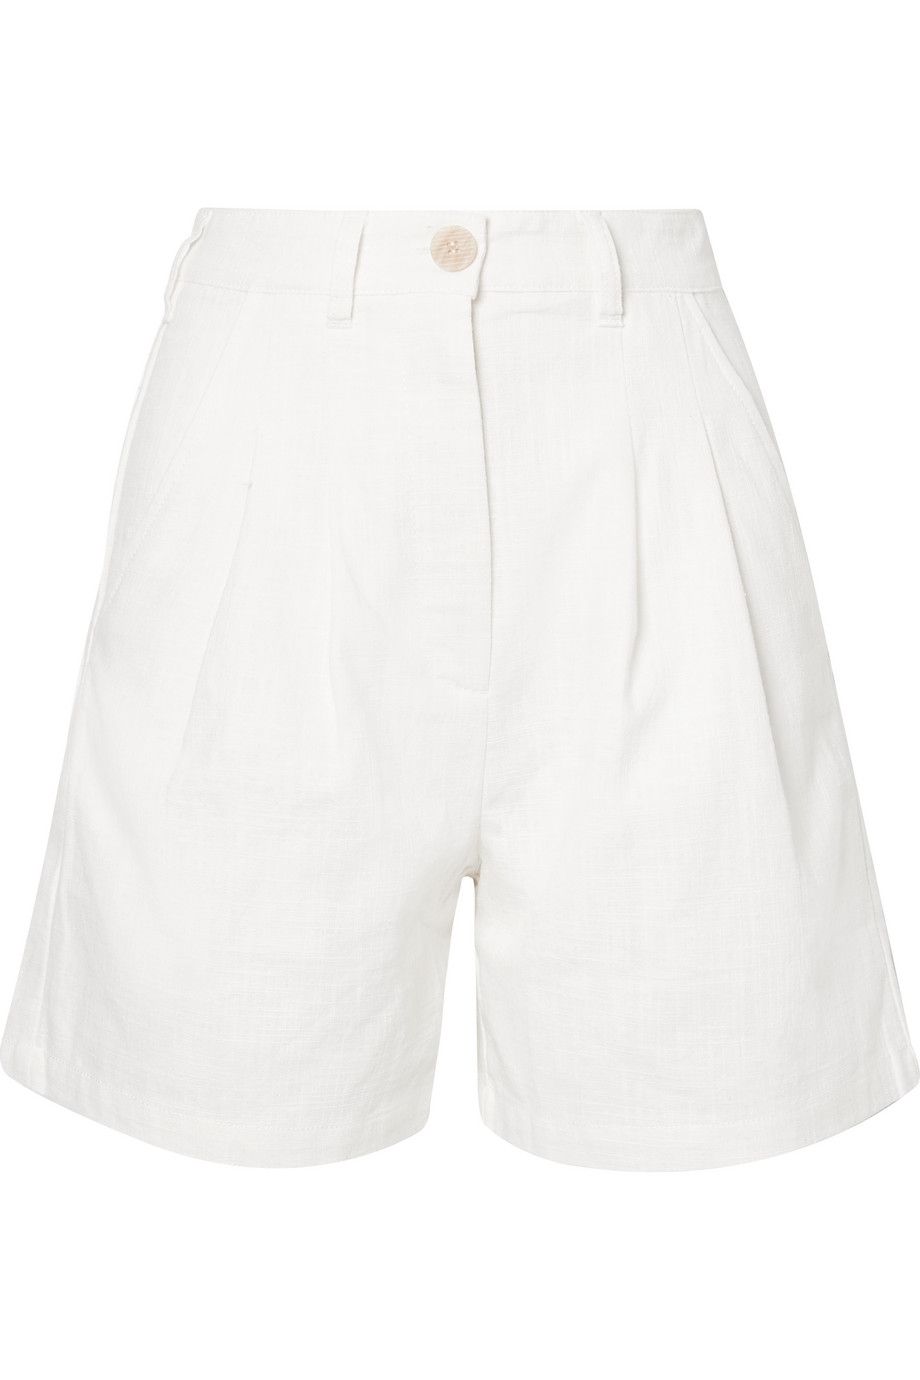 Shop the Look: High-Waisted Cotton Blend Shorts 